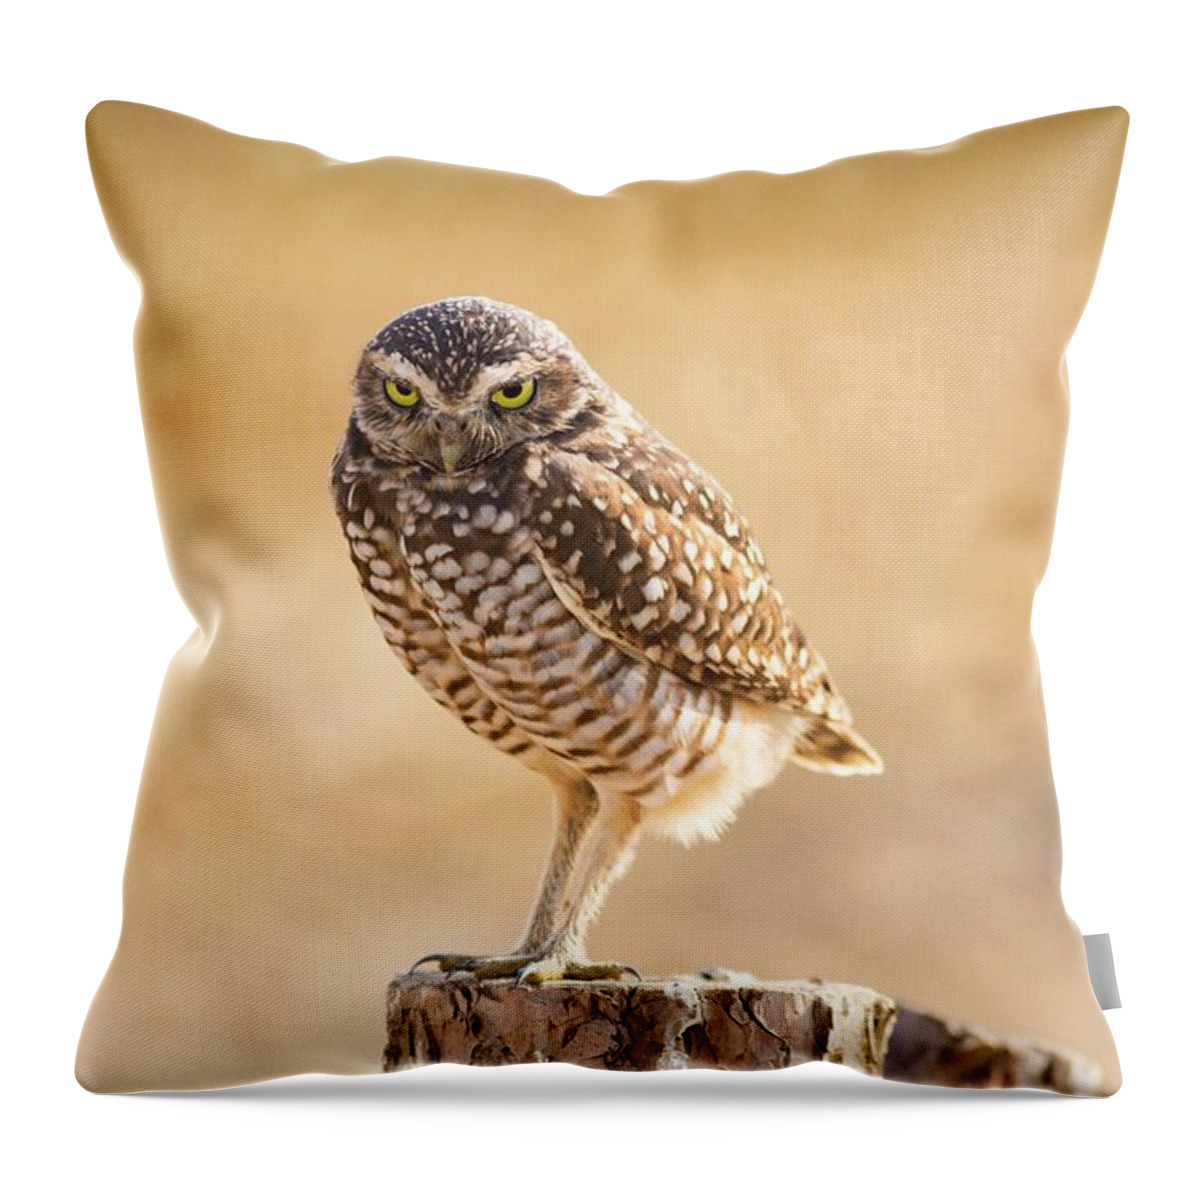 The Look Throw Pillow featuring the photograph The Look by Lynn Hopwood